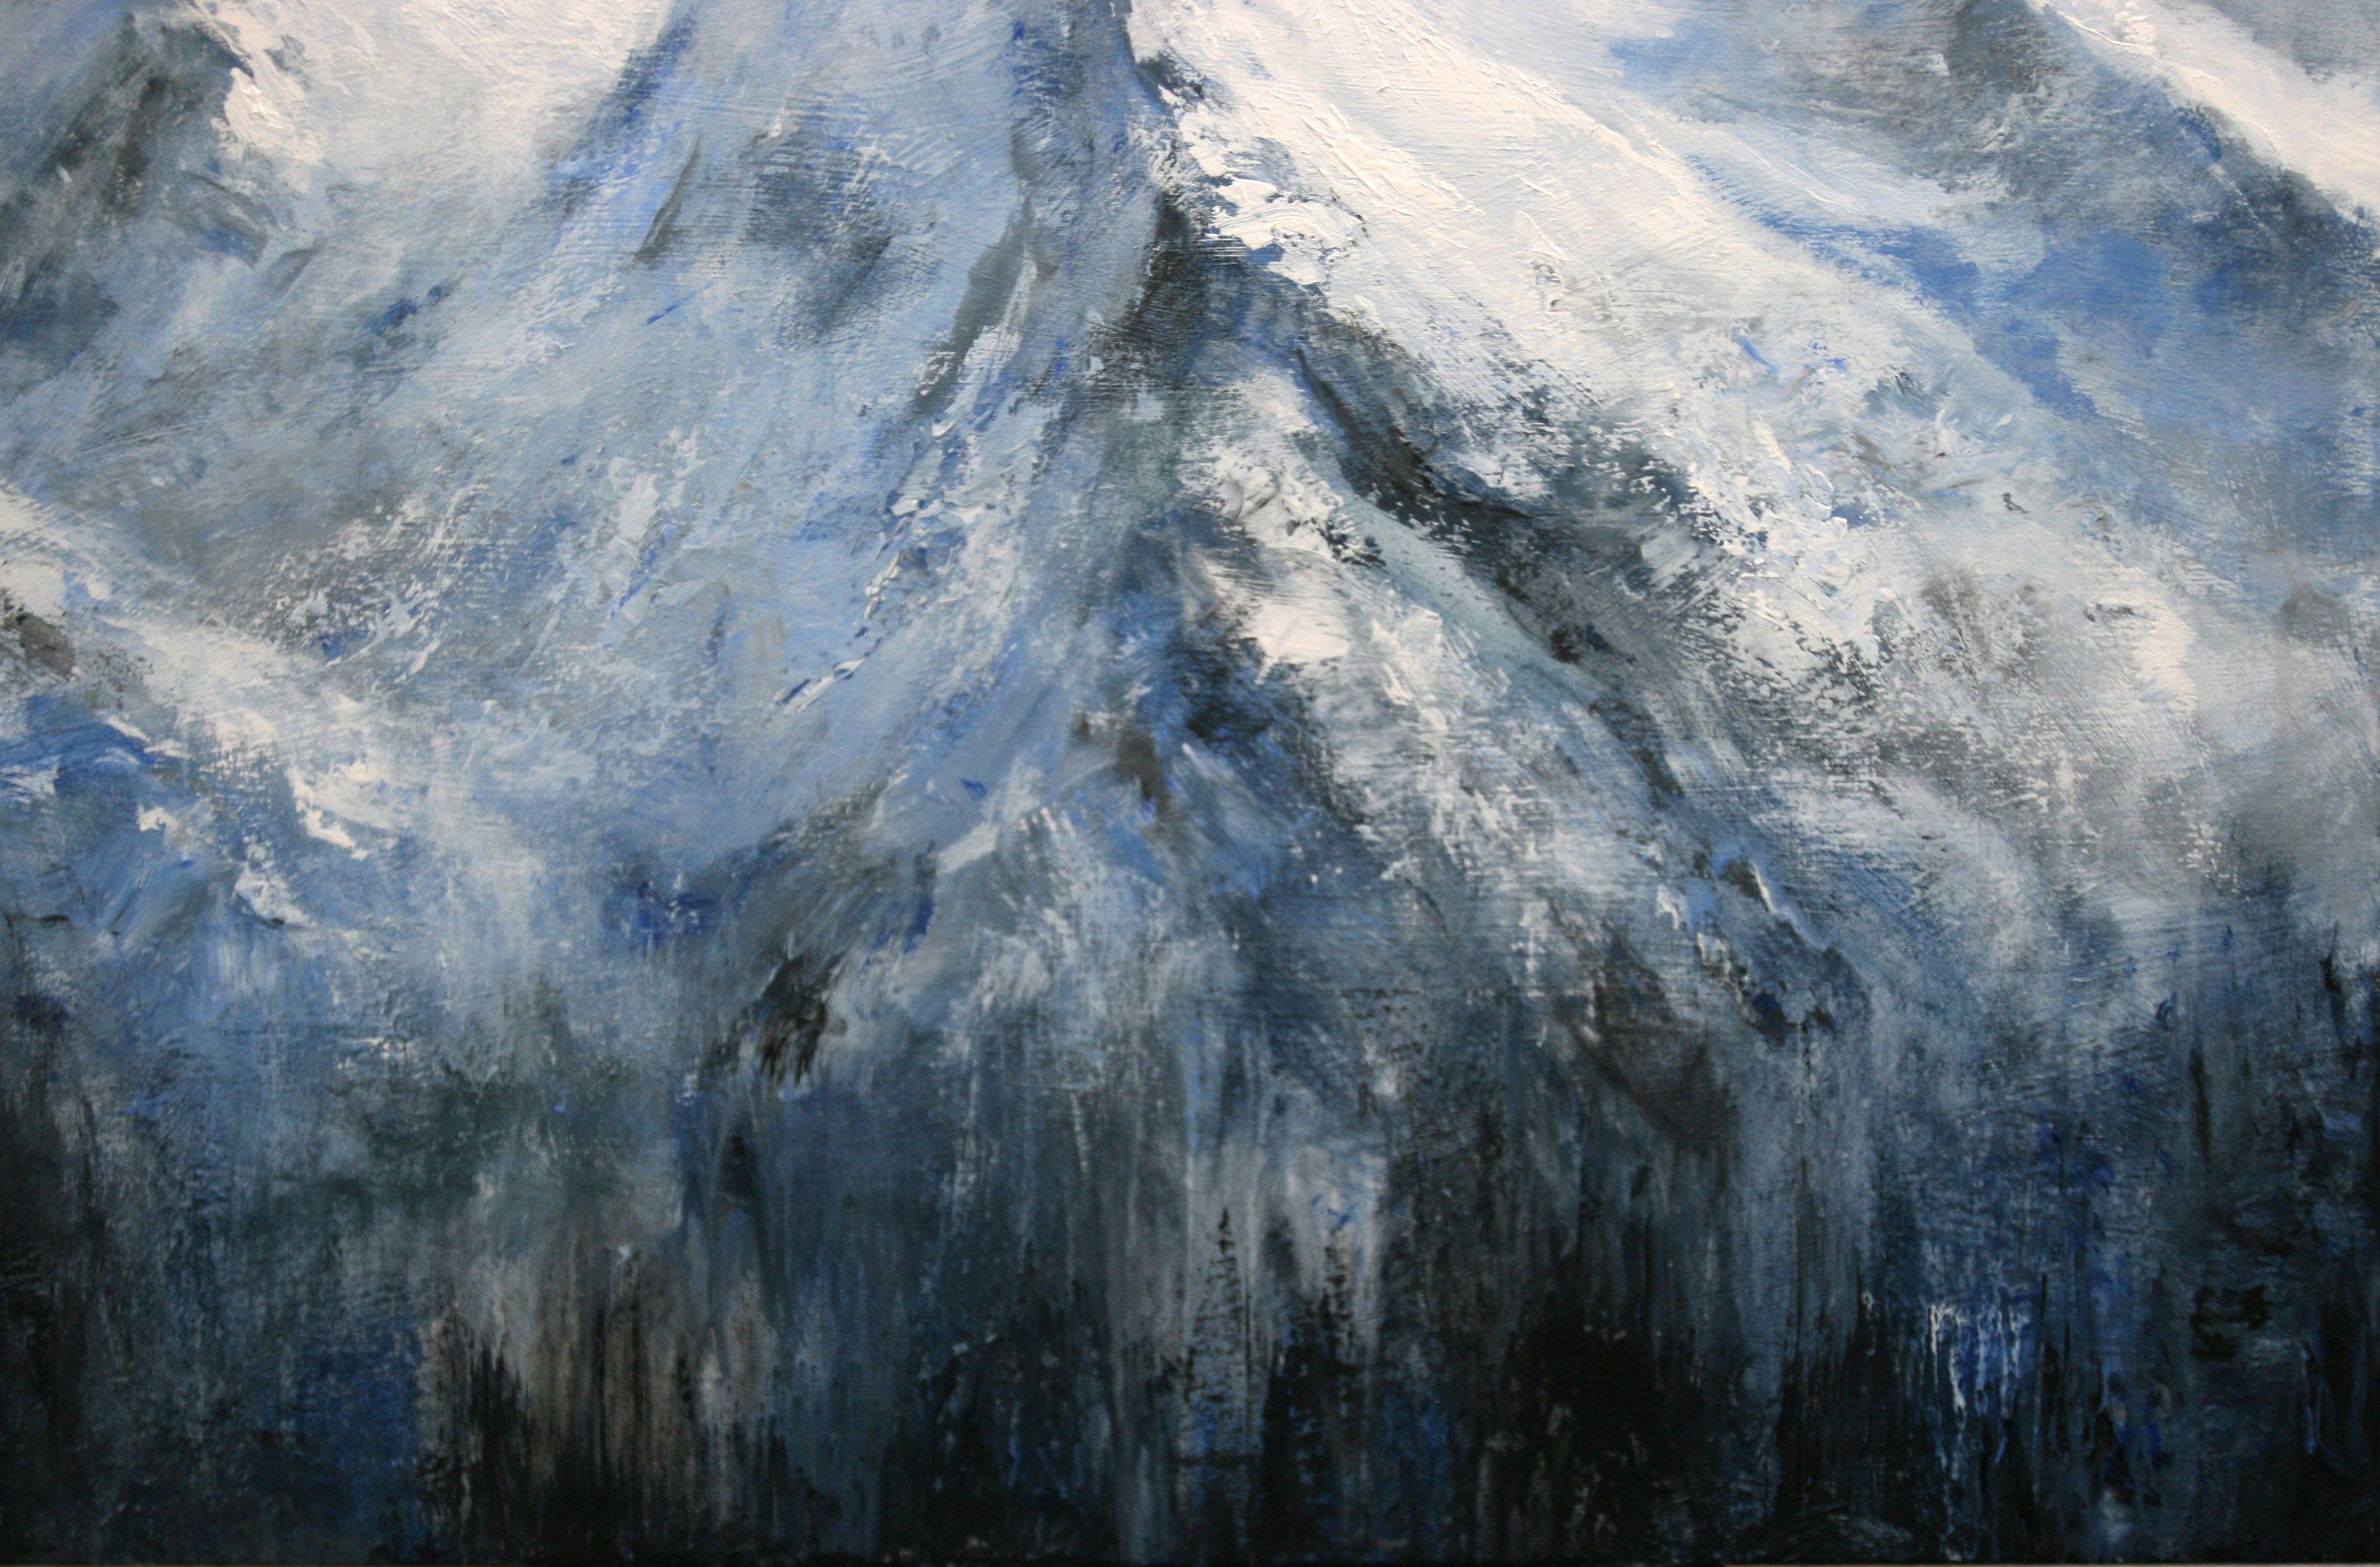 This artwork develops the abstract image of a snowy mountain with expressive but at the same time subtle brushstrokes.  This painting is an imaginary landscape but inspired by the mountains in the Alps.  This high quality acrylic painting is done on